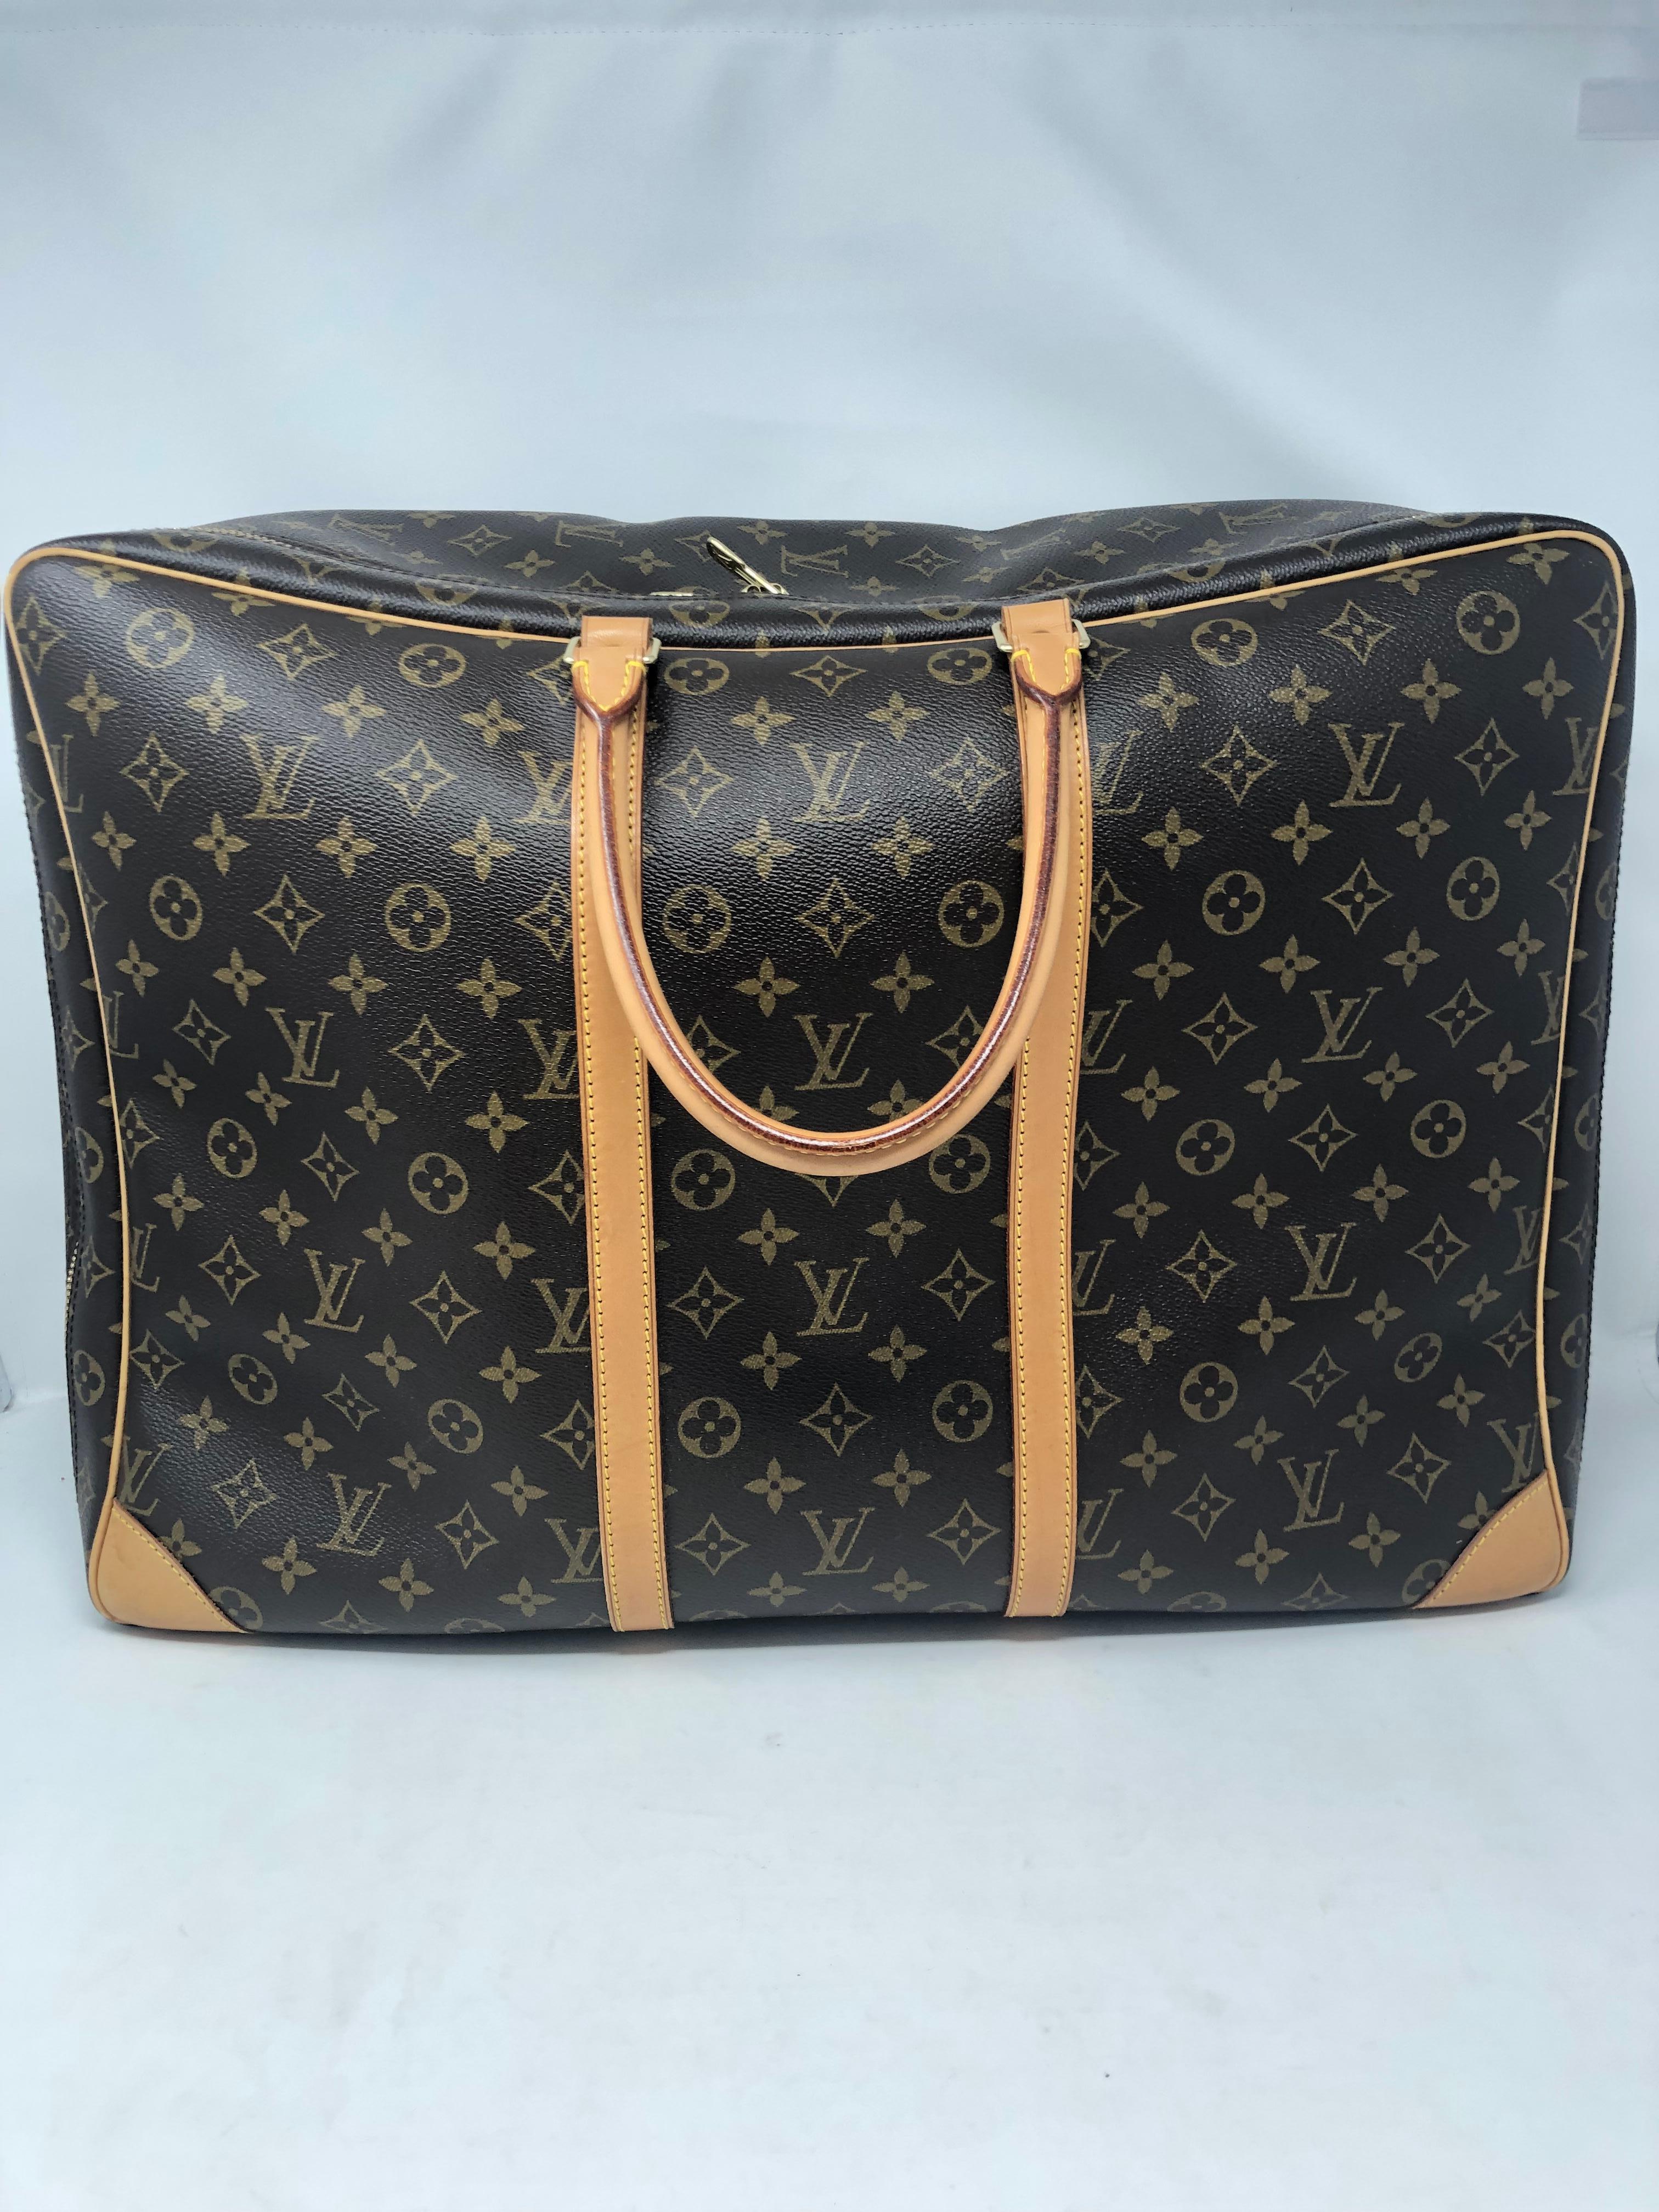 Louis Vuitton Sirius Luggage. Carry on size. Monogram LV luggage. Mint condition. Clean interior. No odors. A classic travel companion. Guaranteed authentic. 